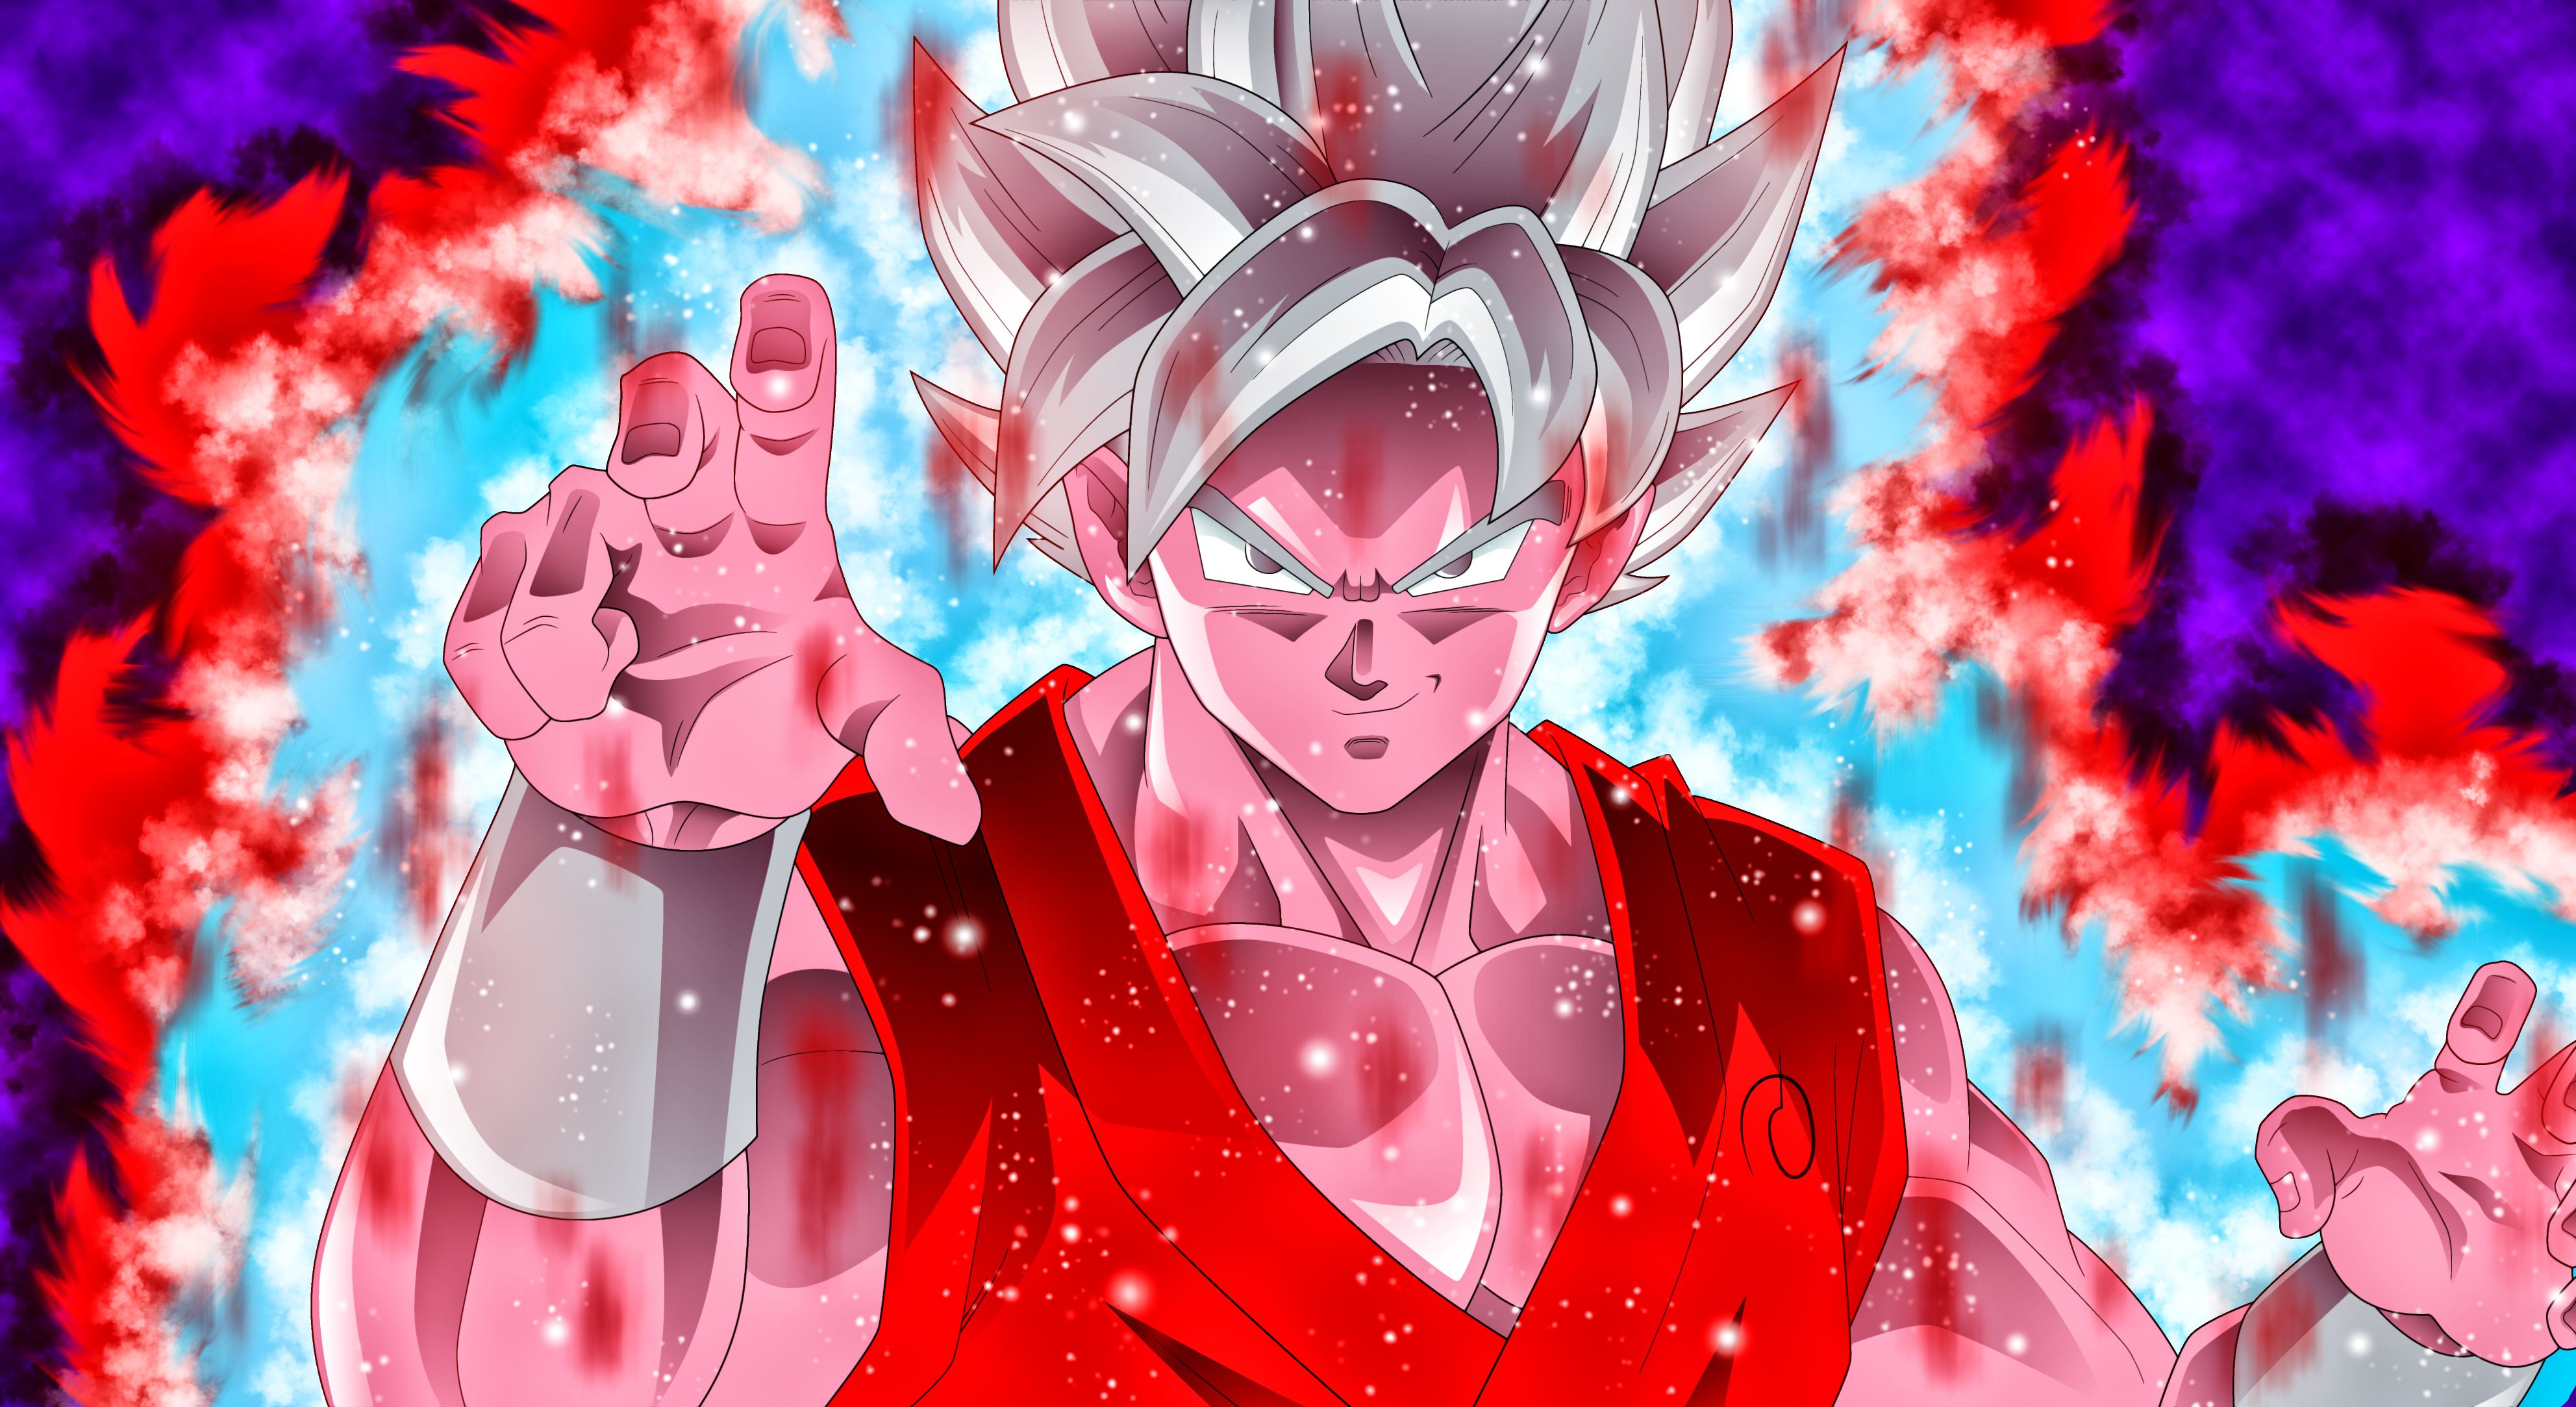 Dragon Ball Z 4k, HD Anime, 4k Wallpapers, Images, Backgrounds